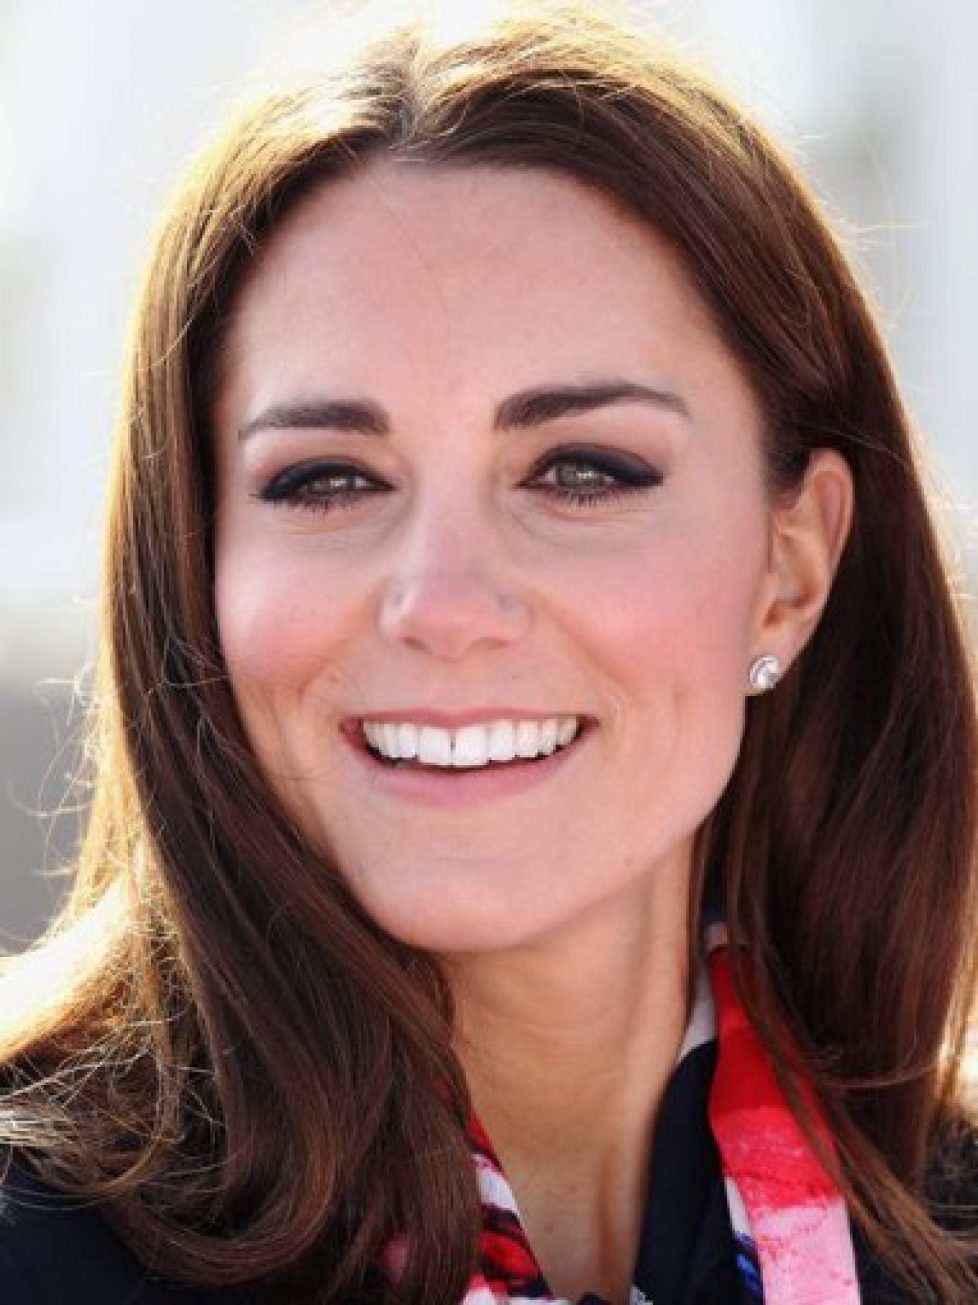 the-duchess-of-cambridge-visits-the-olympic-park-13-1331820244-view-1